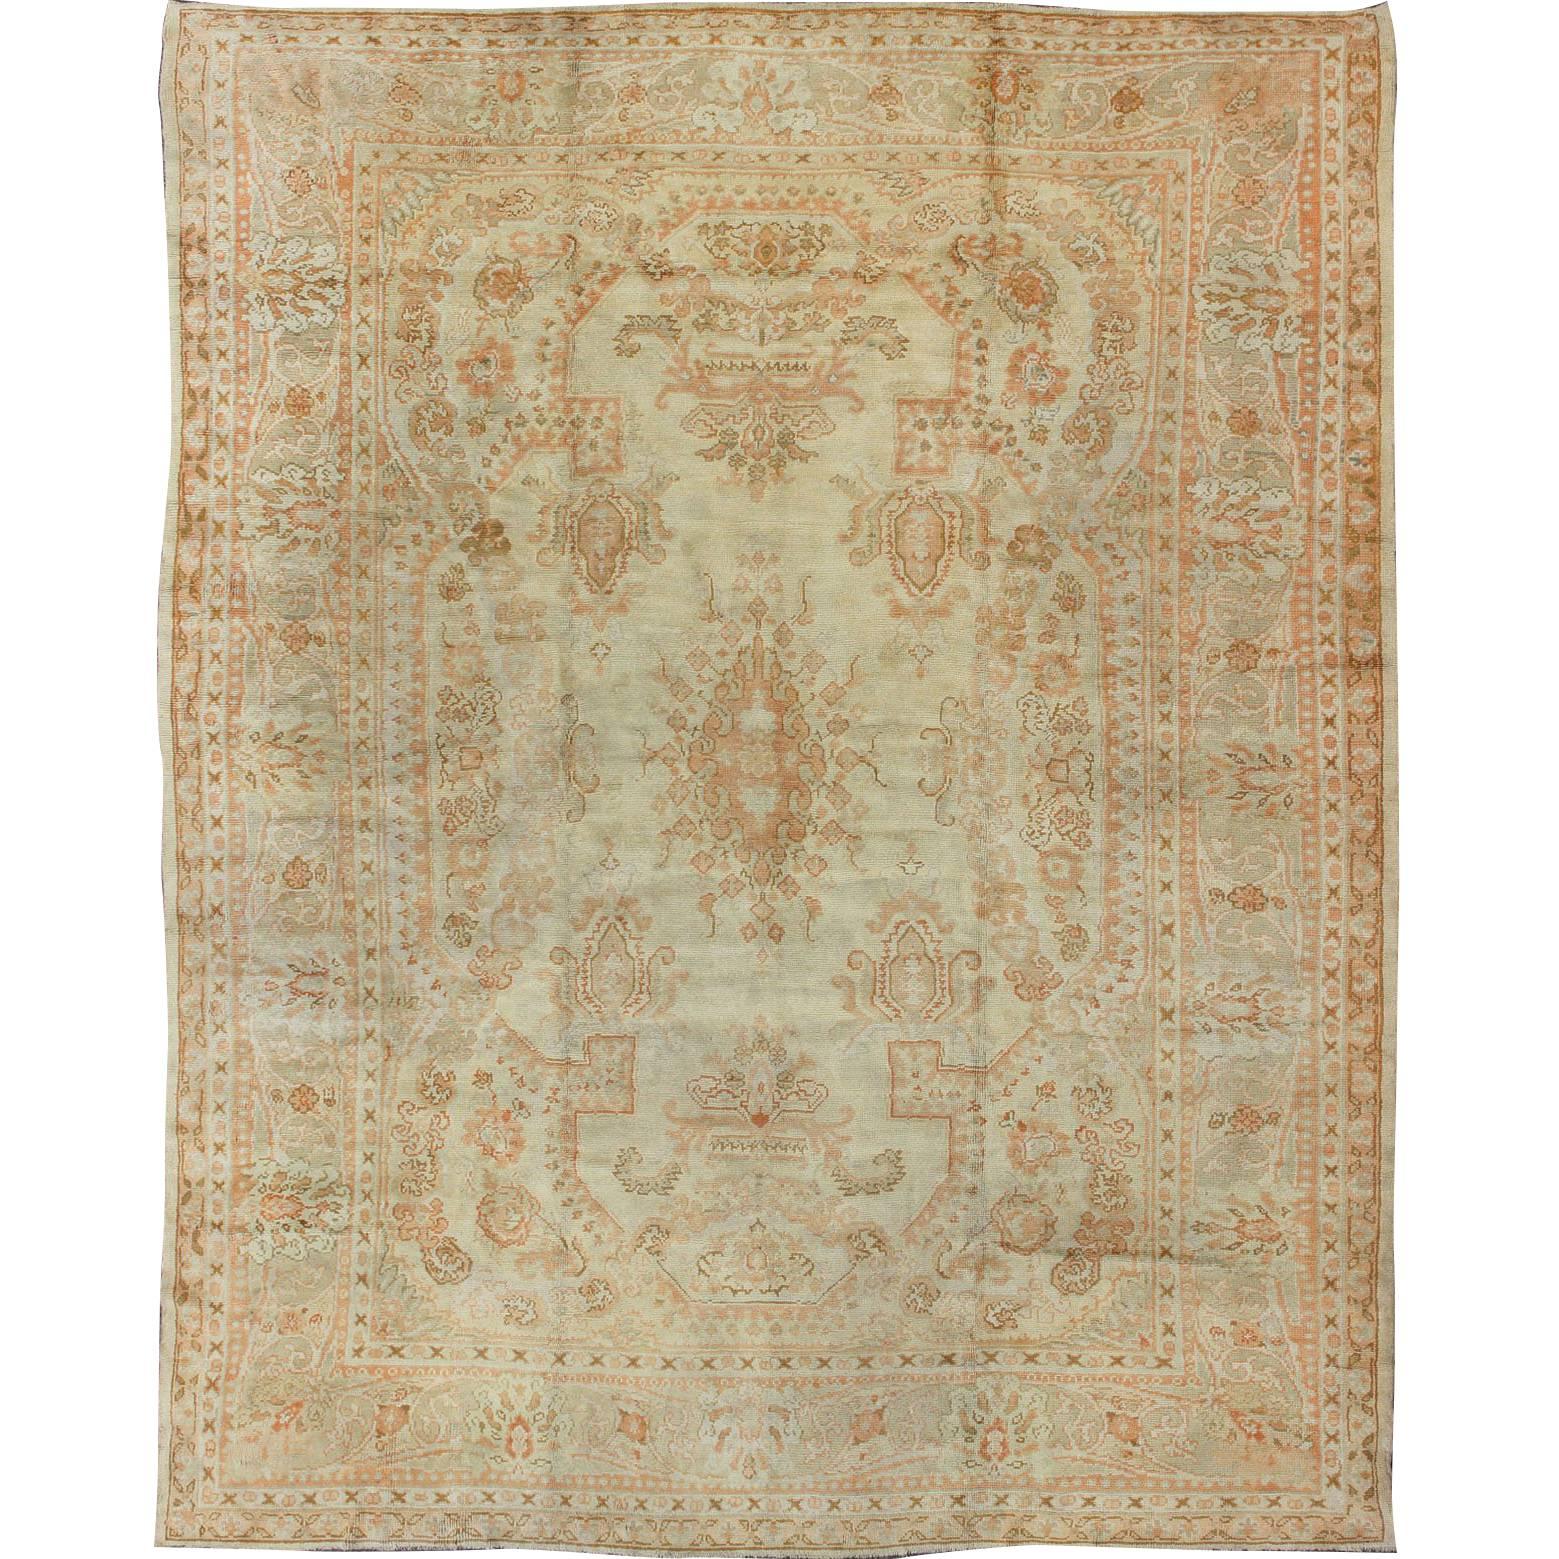 Large Antique Oushak Carpet in Ivory Background, Taupe, Gray , Green and Salmon